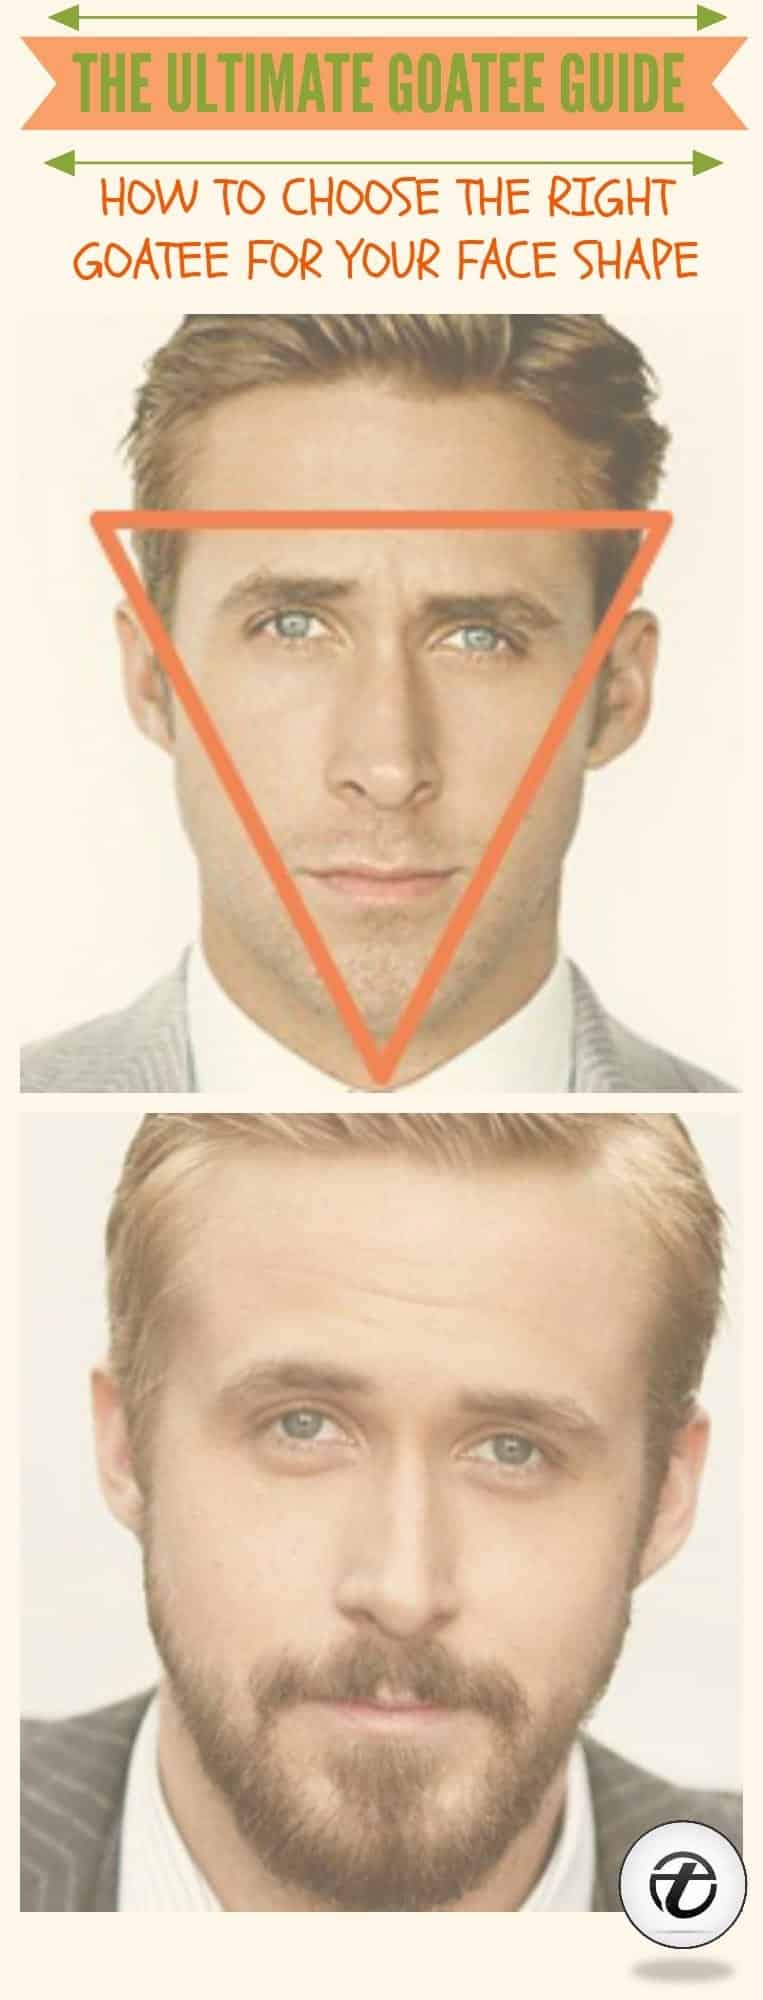 Goatee Styles-50 Popular Goatee Beard Styles for Different Face